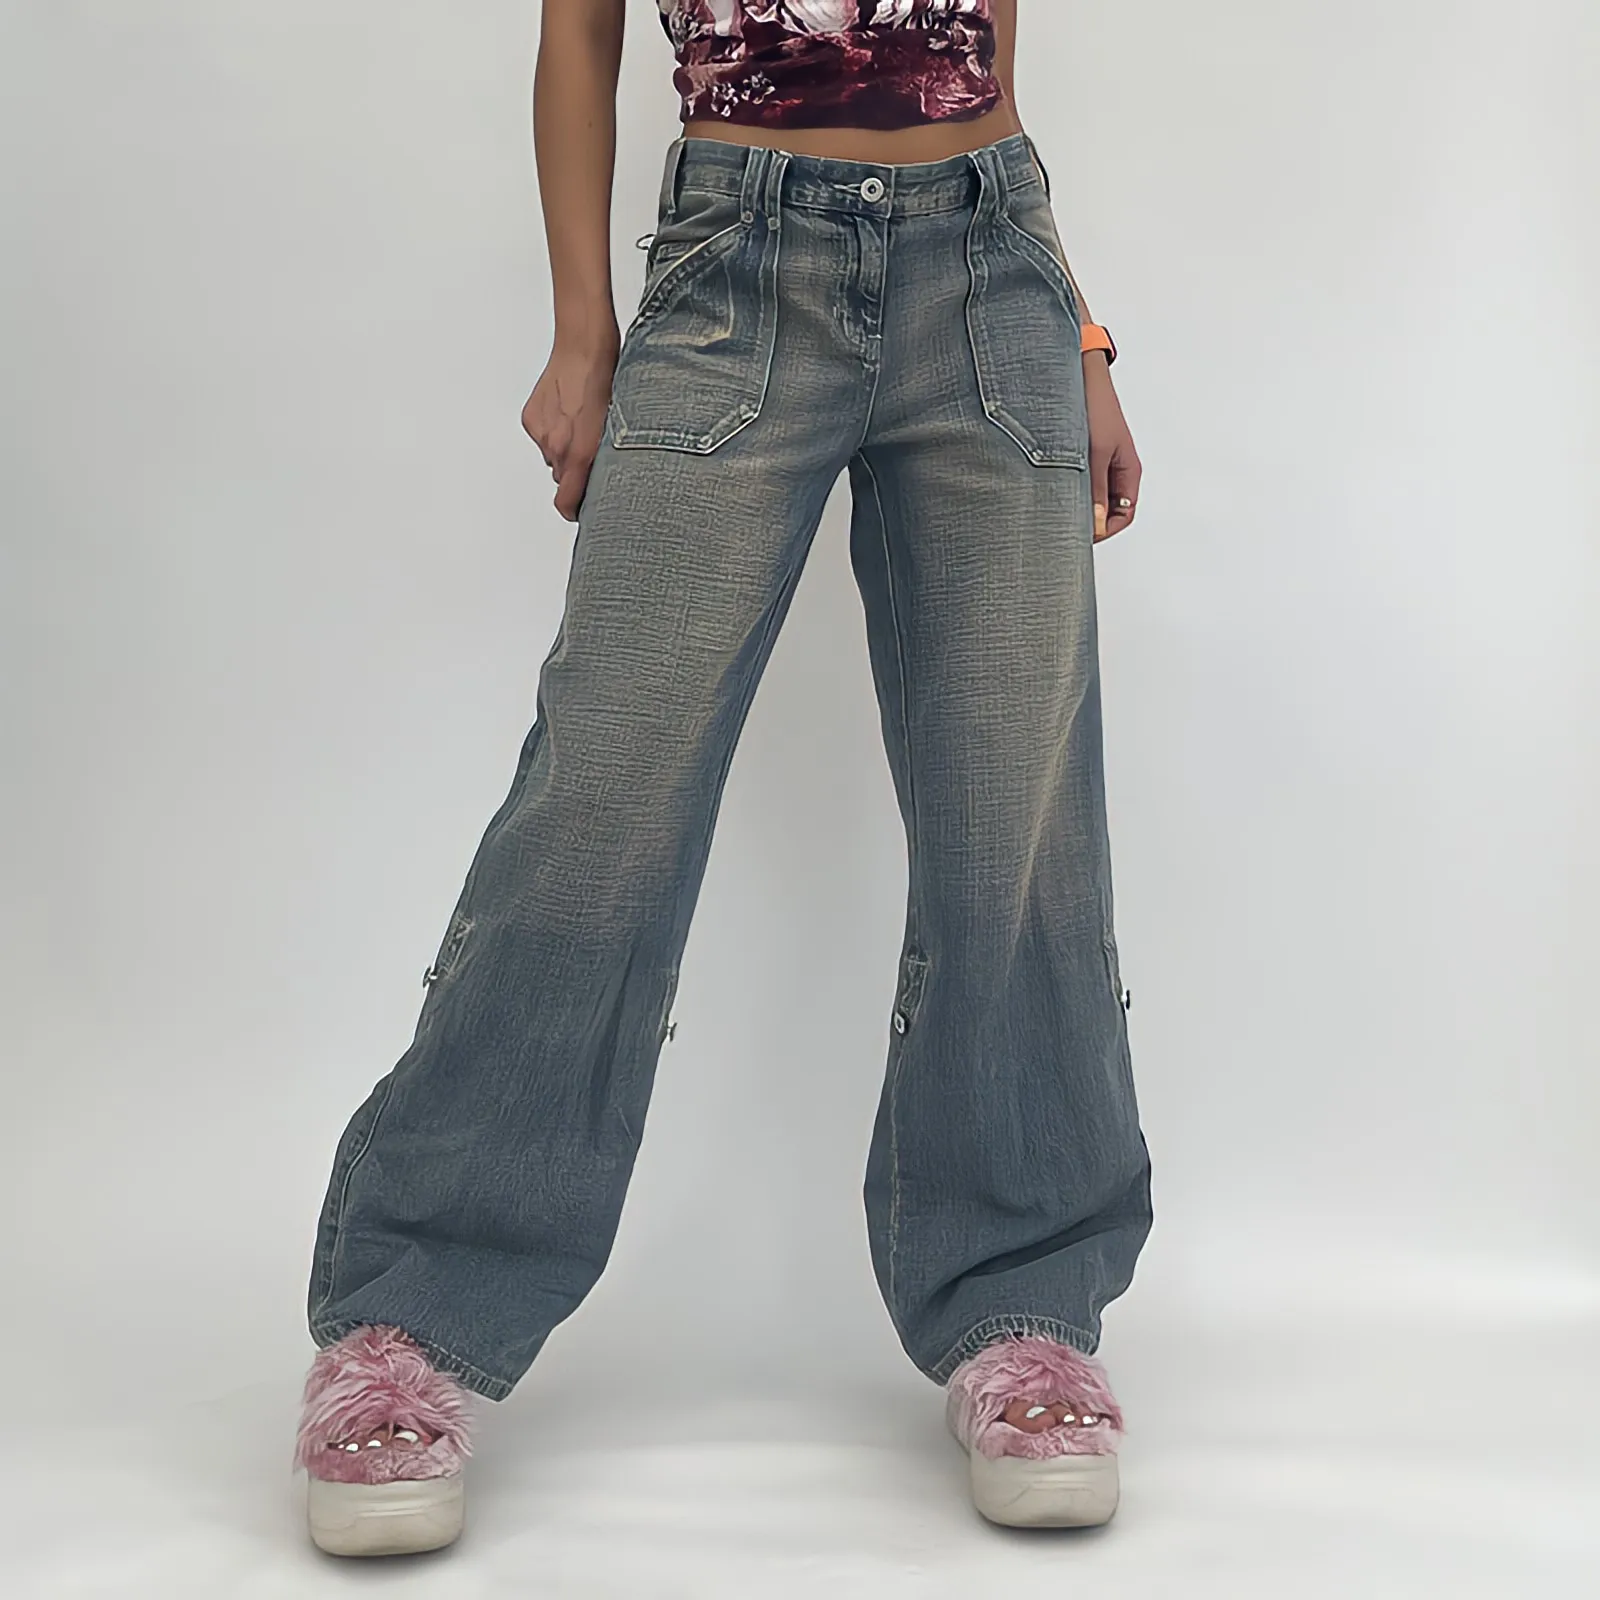 

Low Rise Jeans Women American Style Straight Wide Leg Pants Vintage 90s Streetwear Neutral Washed Do Old Vibe Denim Trousers